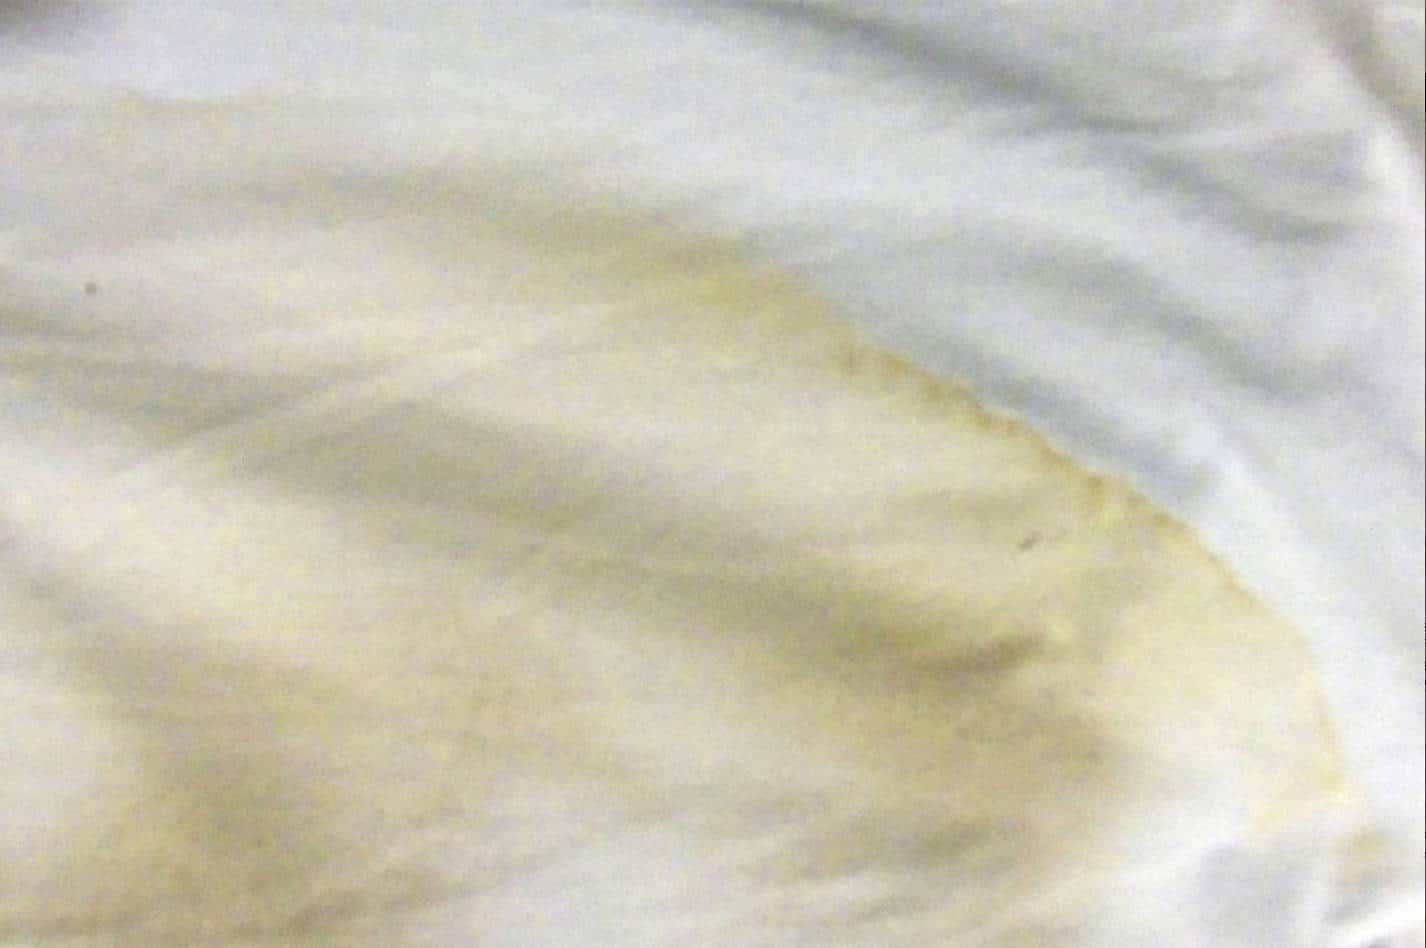 bleach turned white clothes yellow